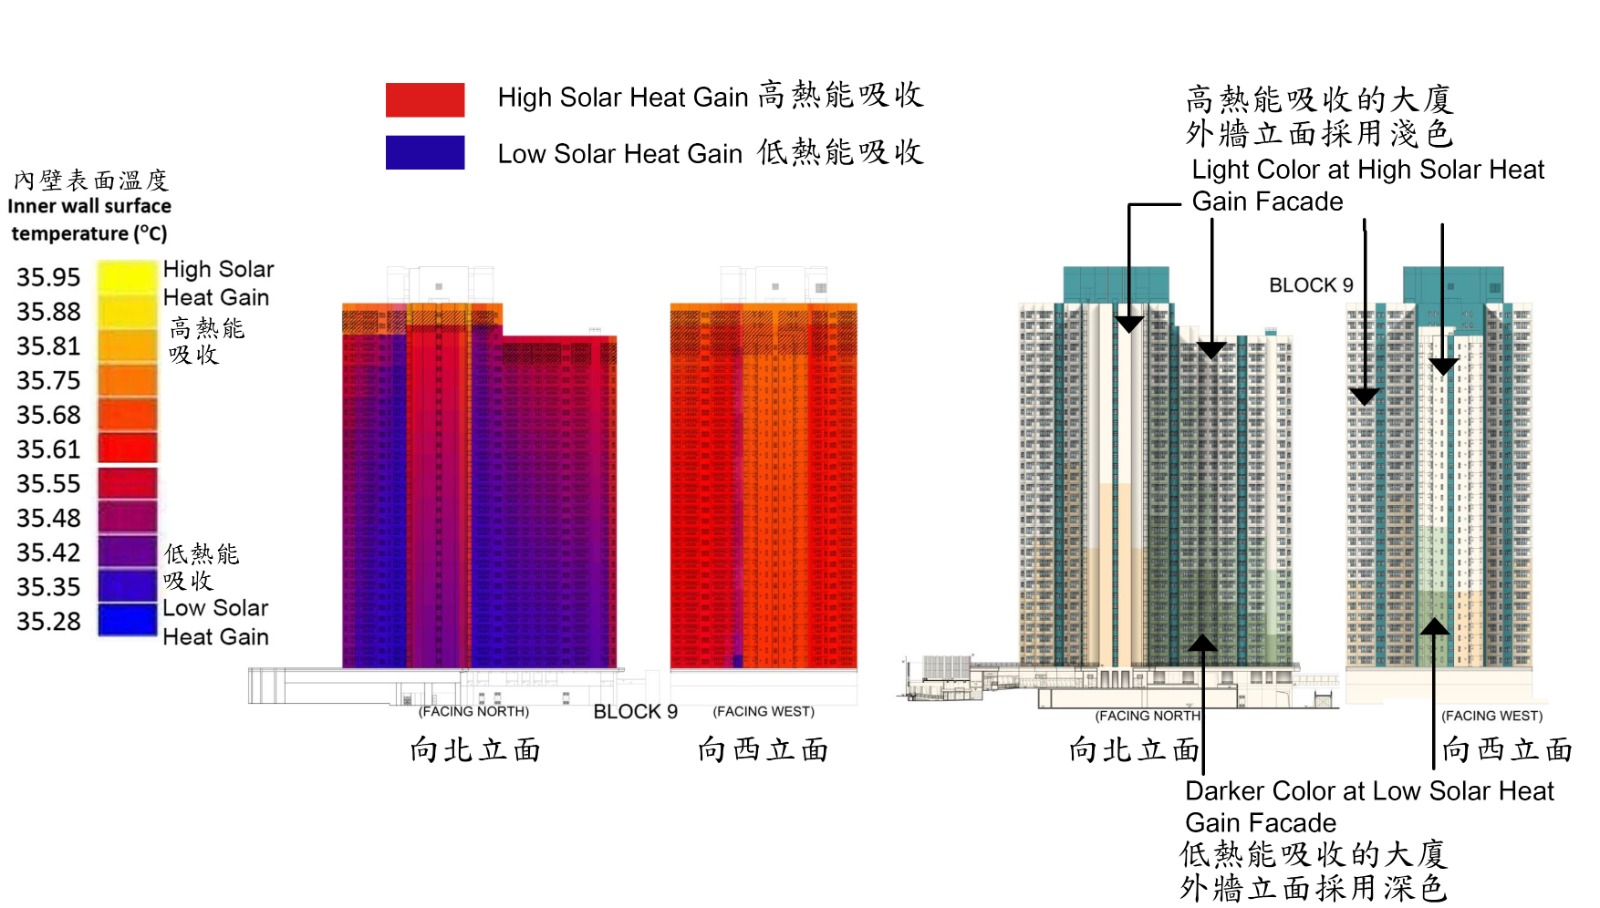 Thermal study for external façade colour at On Tai Estate